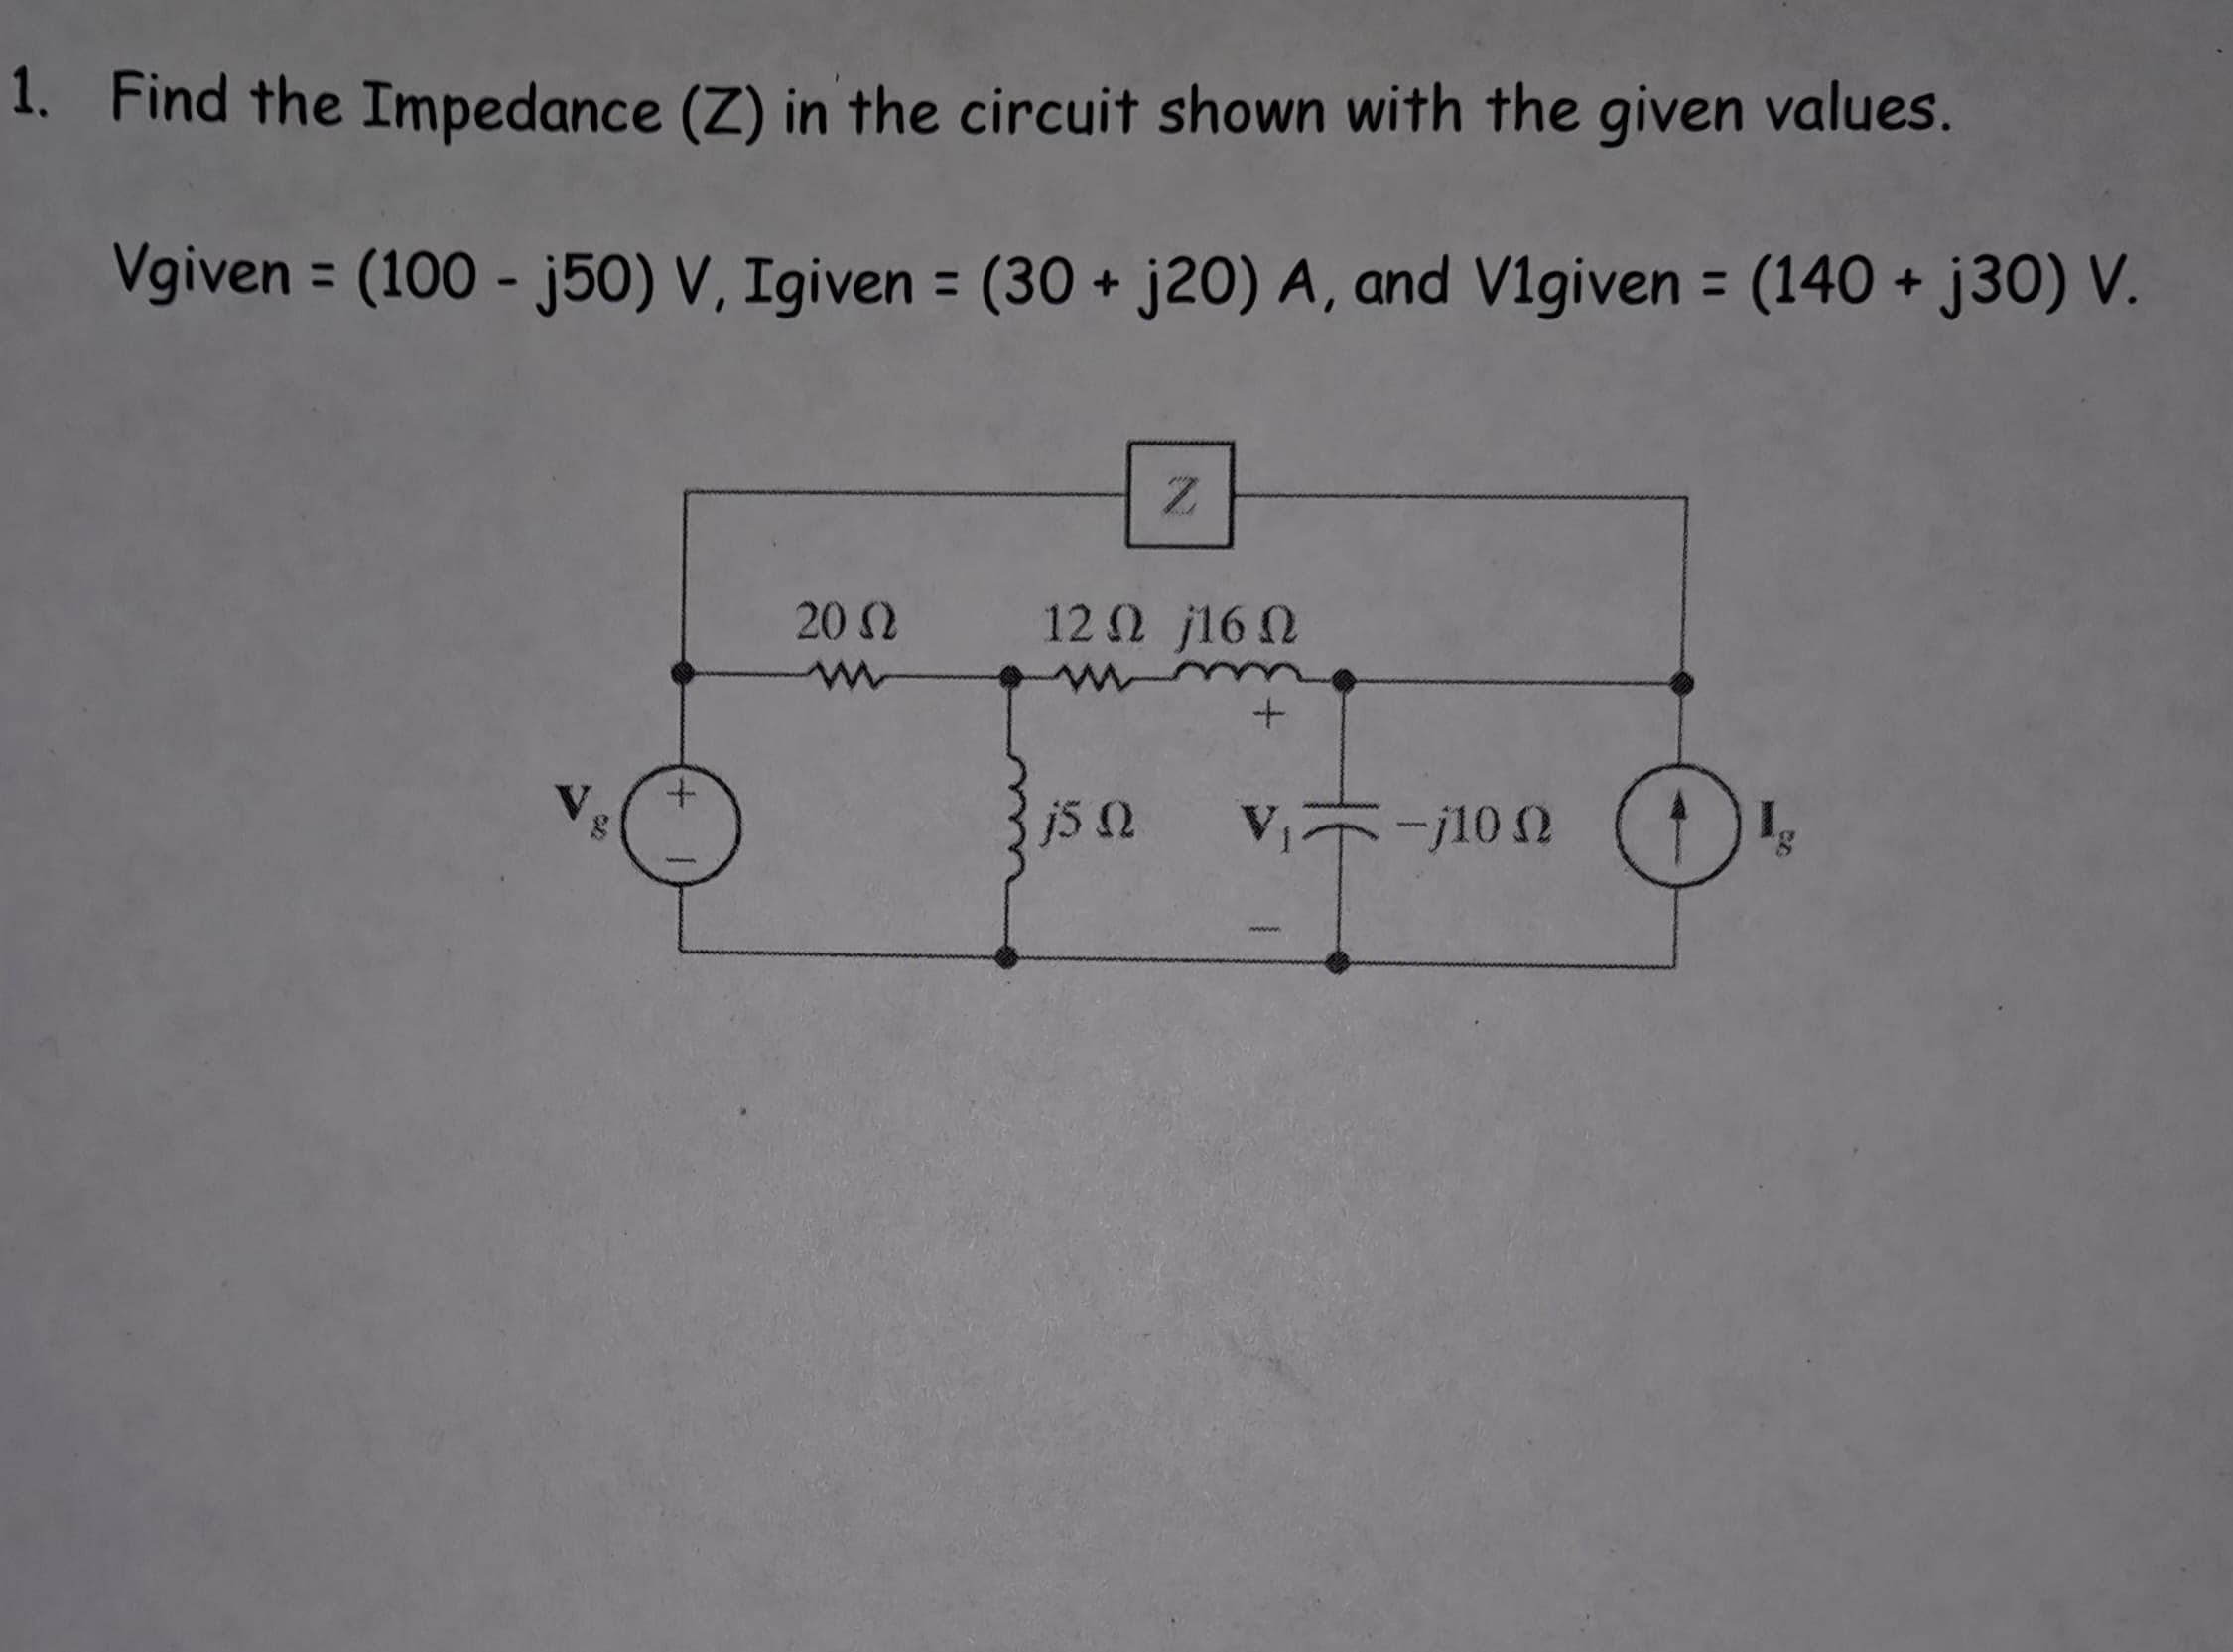 1. Find the Impedance (Z) in the circuit shown with the given values.
=
=
Vgiven (100 - j50) V, Igiven (30+ j20) A, and V1given (140+ j30) V.
=
Z
20 Ω
w
12Ω 16Ω
15 Ω
V₁-10 2
100 C